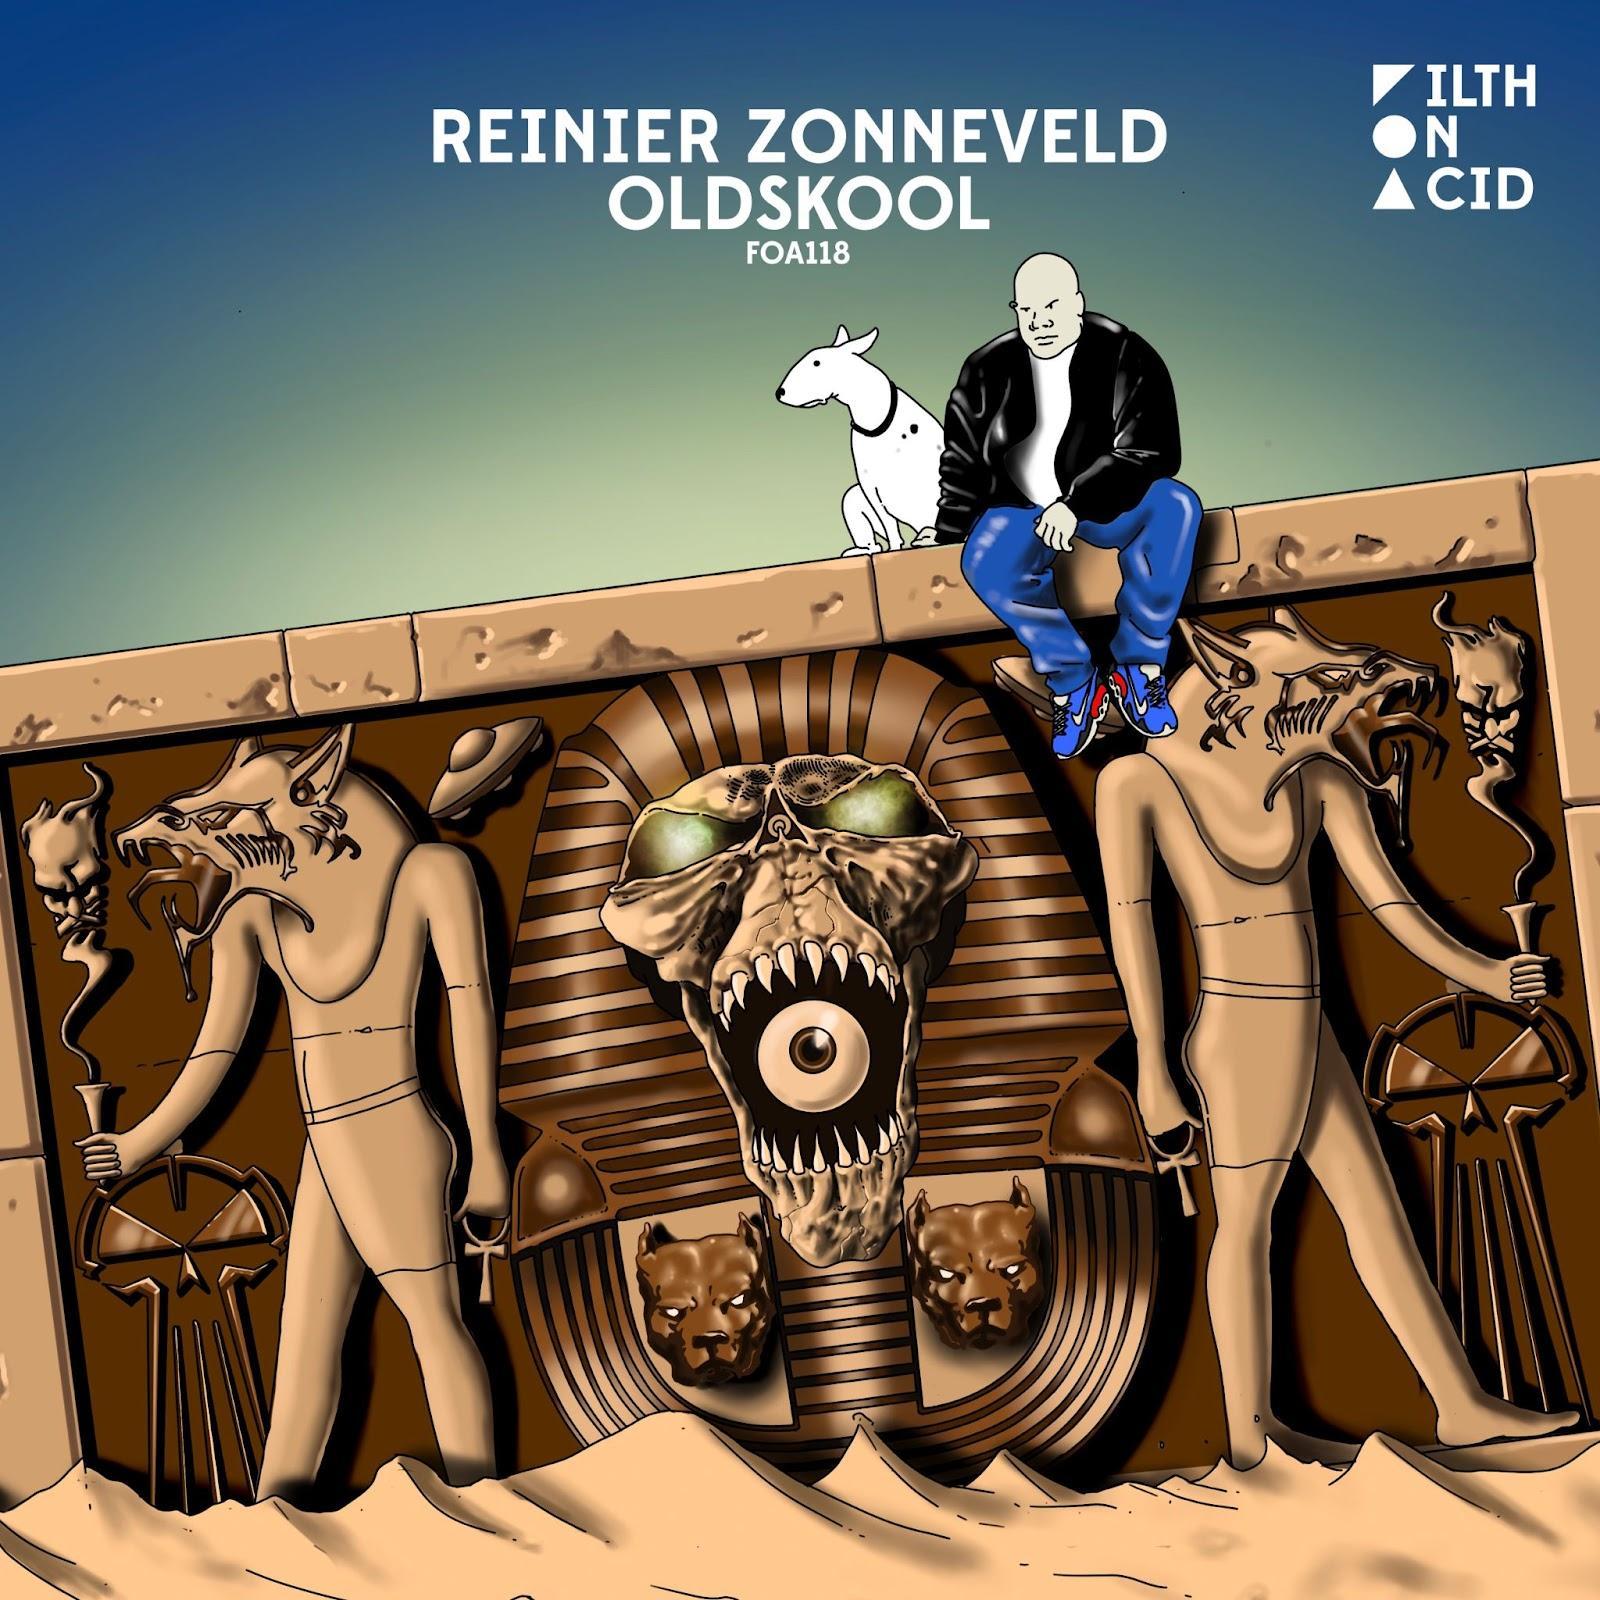 Filth on Acid boss Reinier Zonneveld returns to the label with his âOldskoolâ E